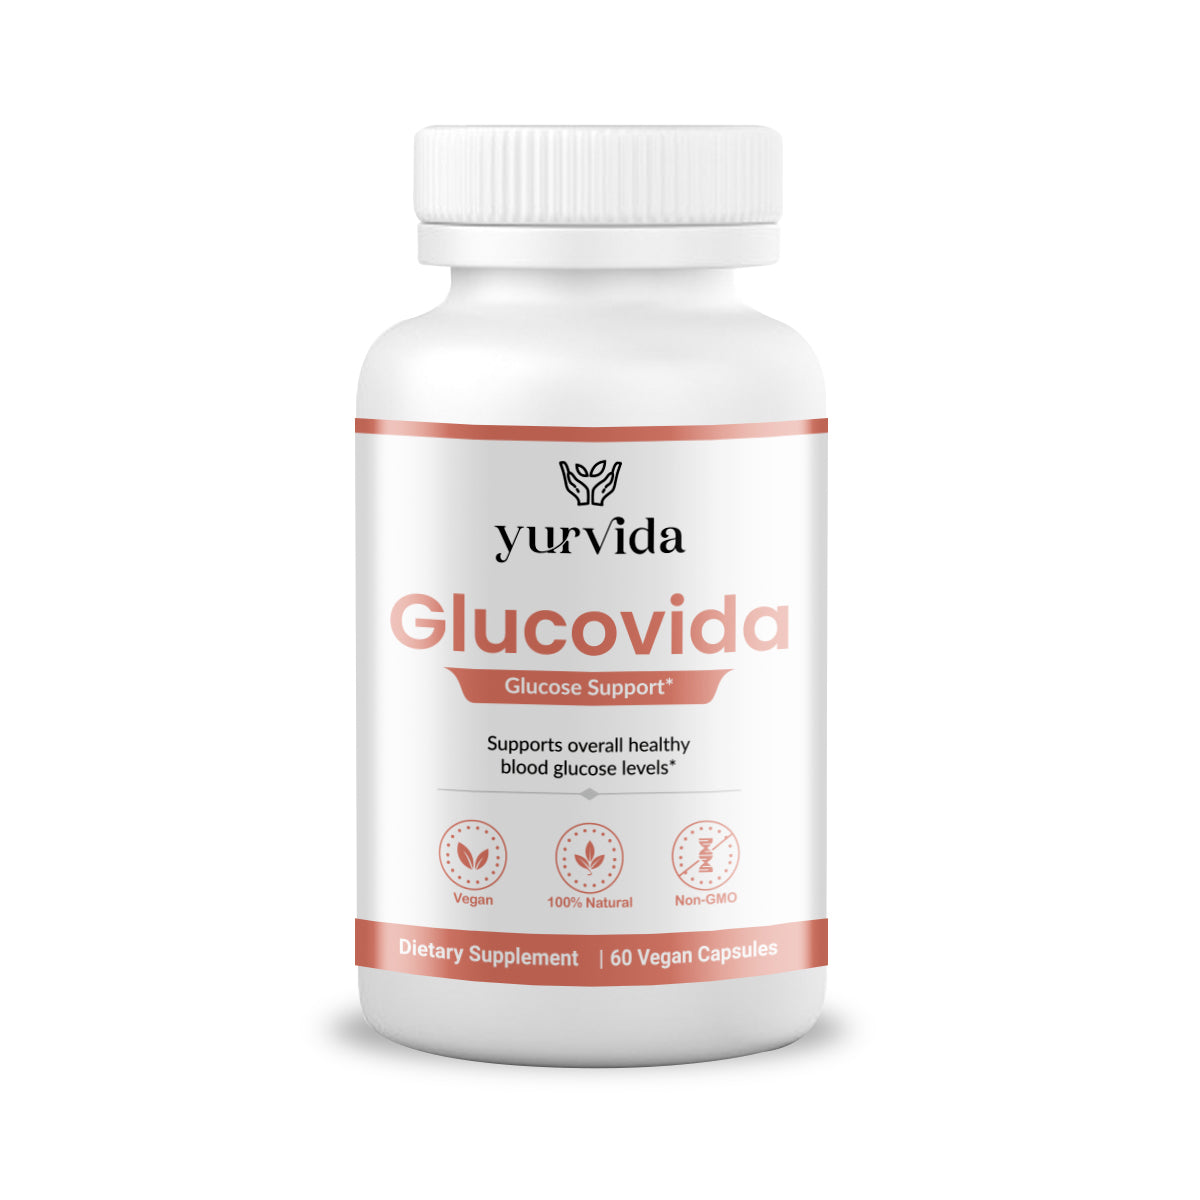 Glucovida - Expert Blend of Extracts to Support Healthy Blood Glucose Levels*